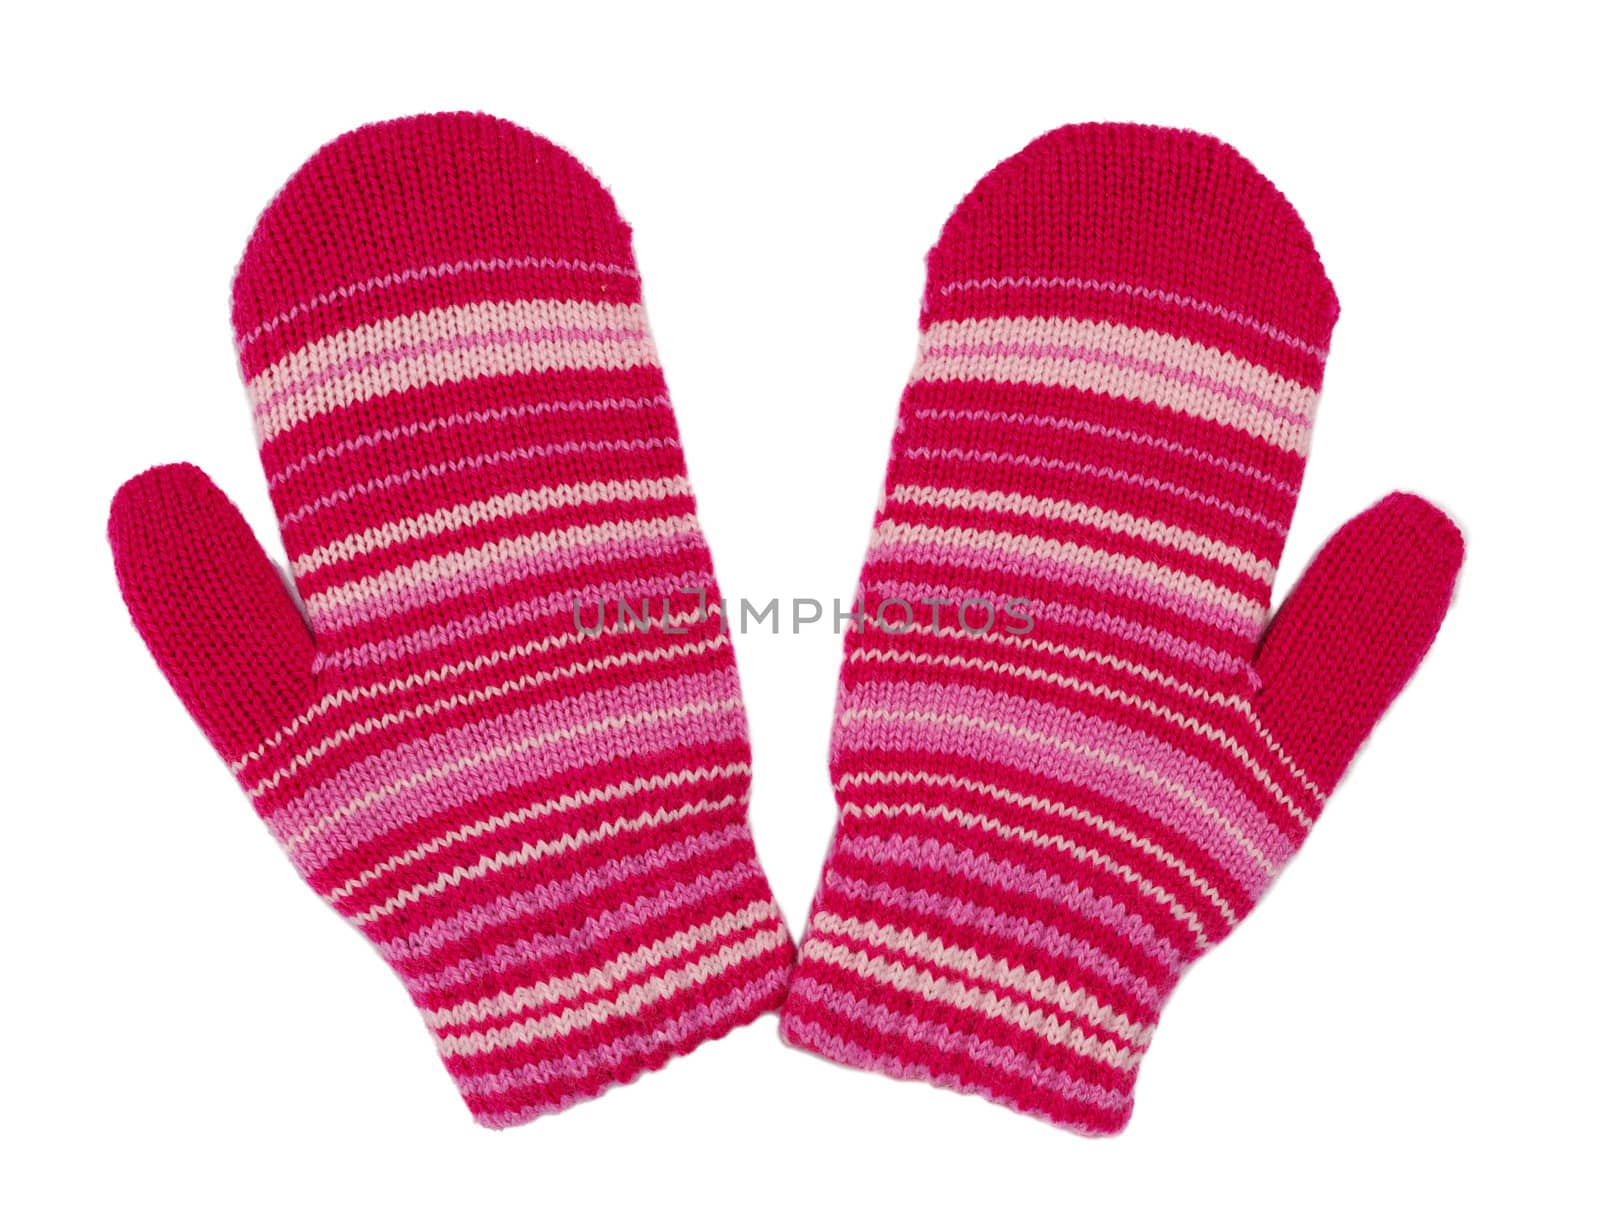 pair of red striped mittens. Isolate on white.